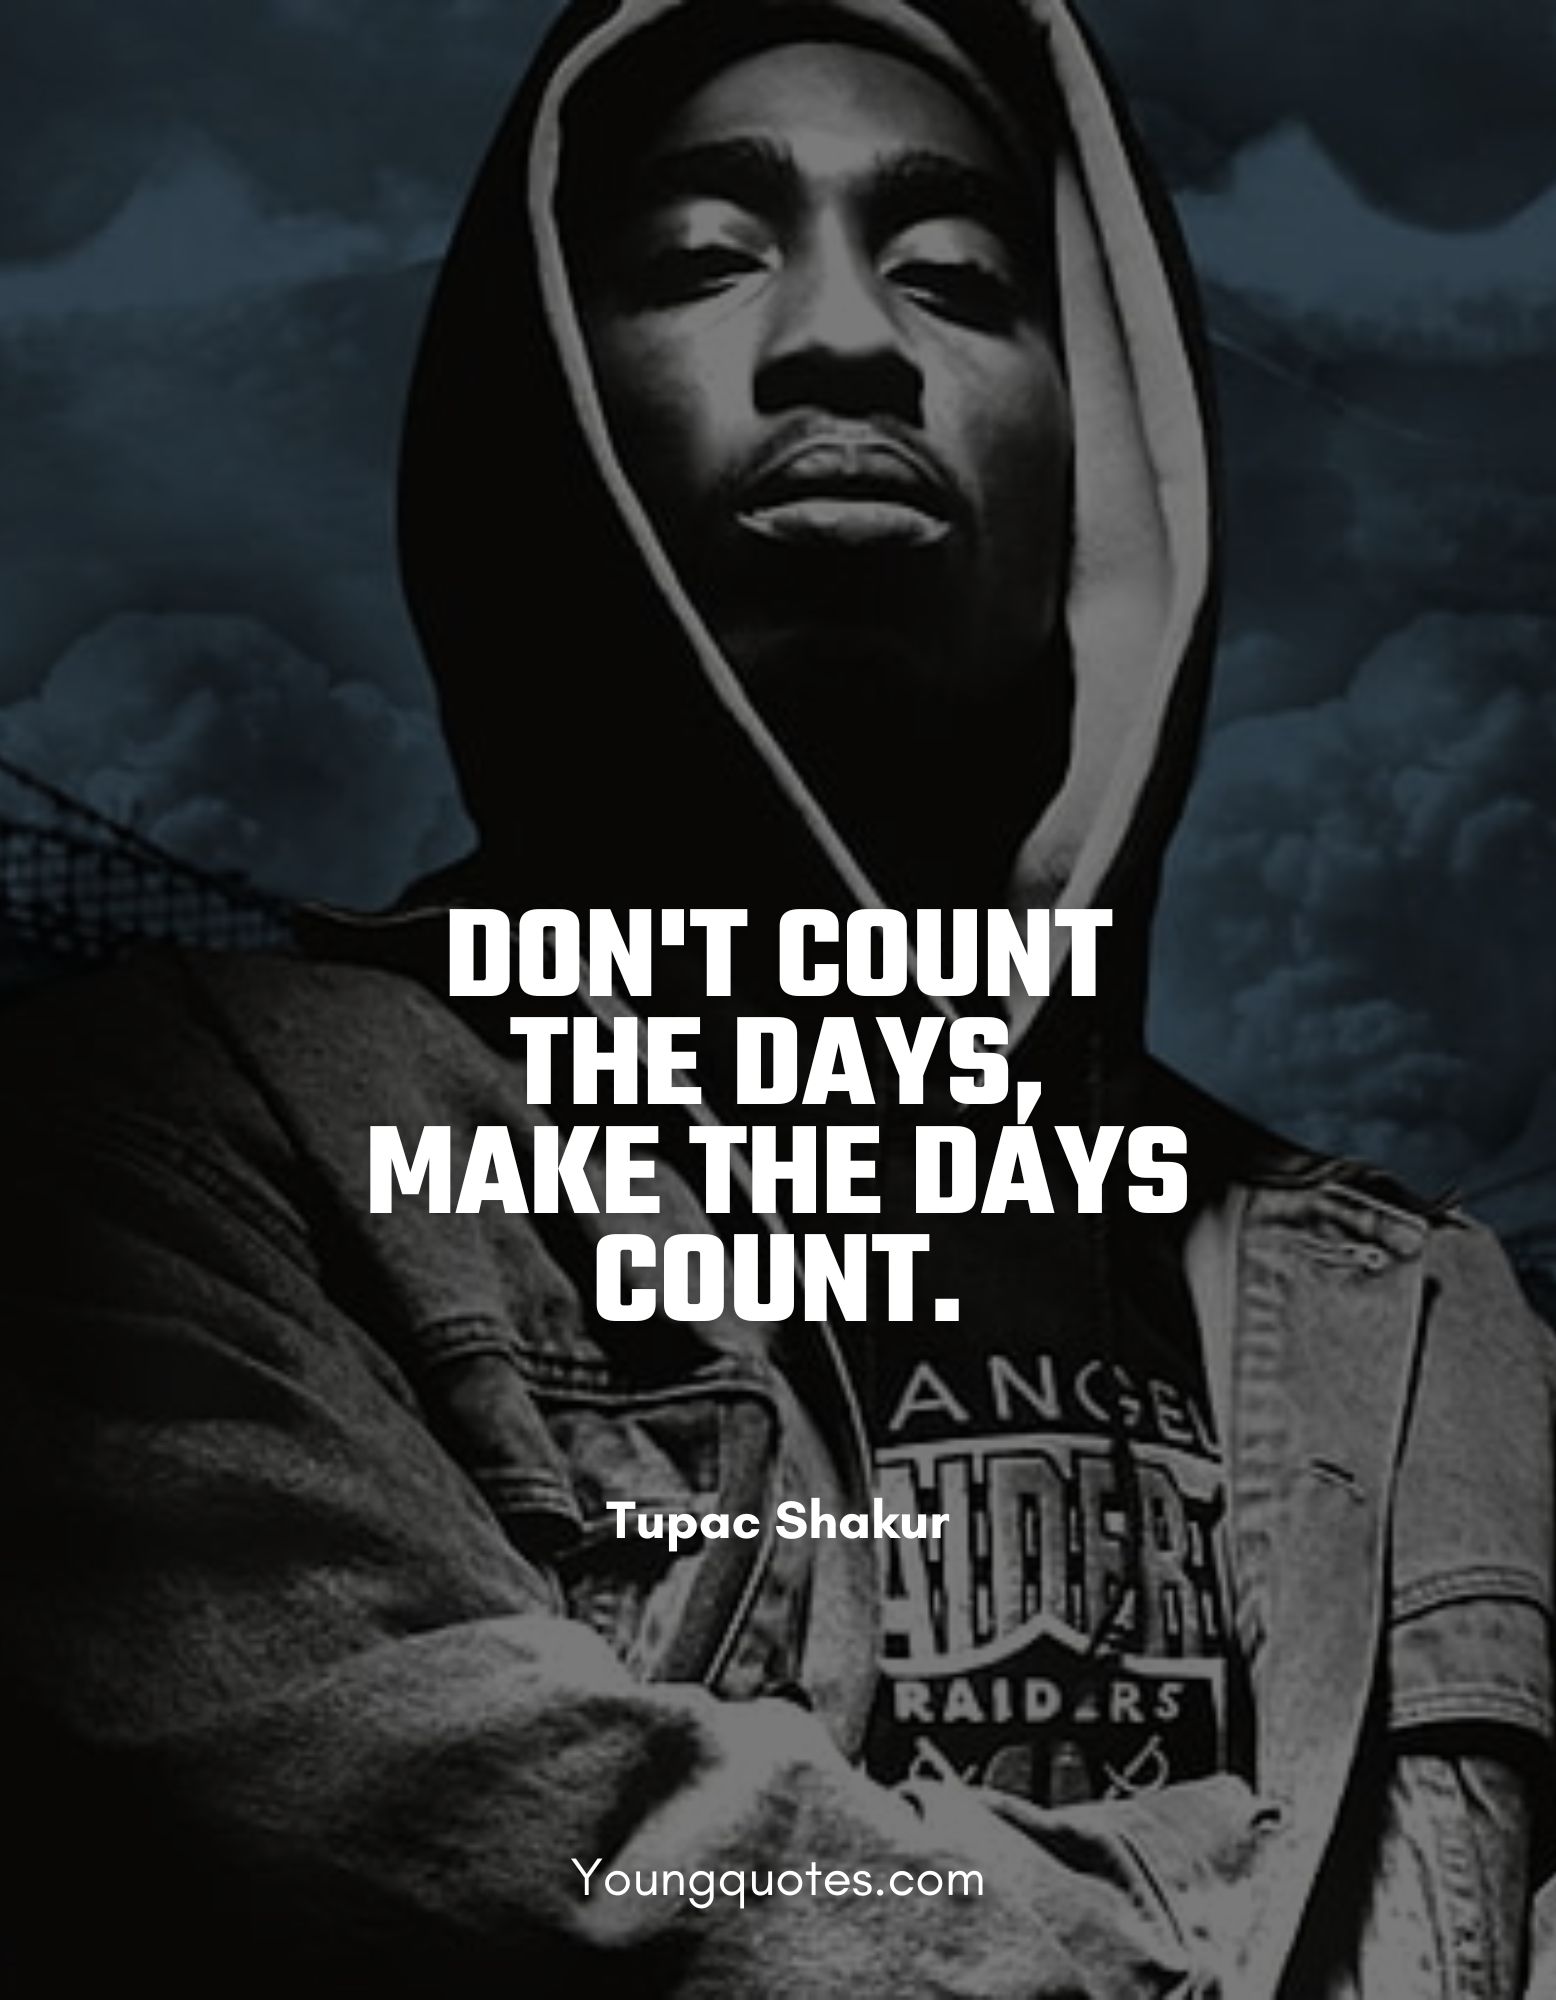 Don't count the days, make the days count. - tupak shakur quotes on life